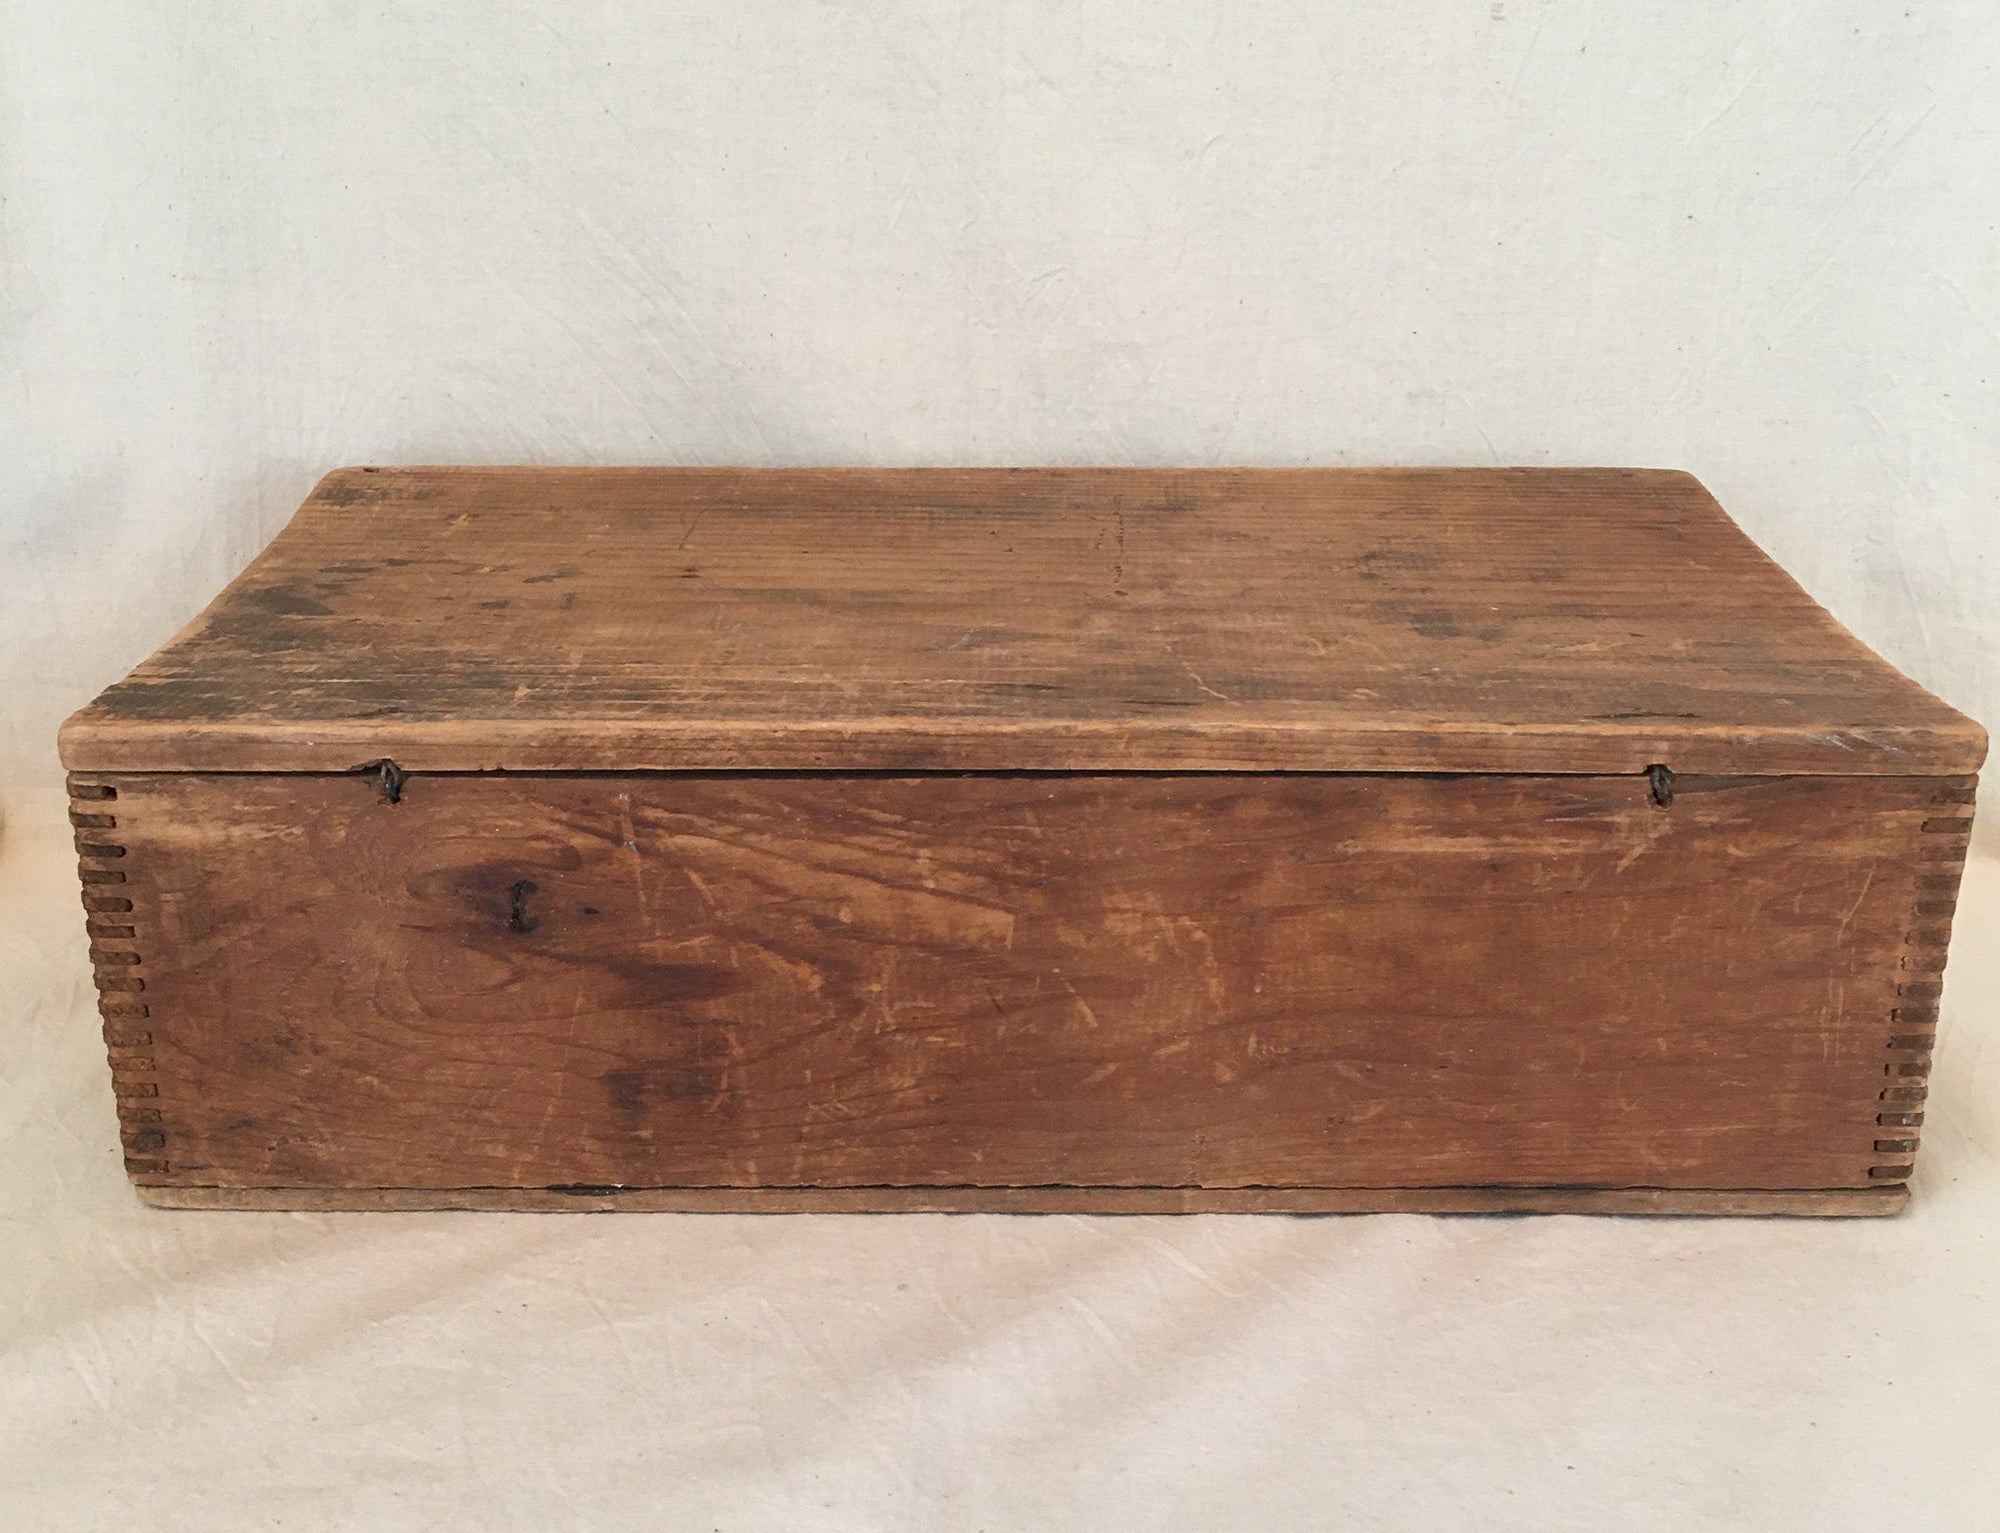 1800’s A. P. Tuller & Co. Wholesale Grocers Box